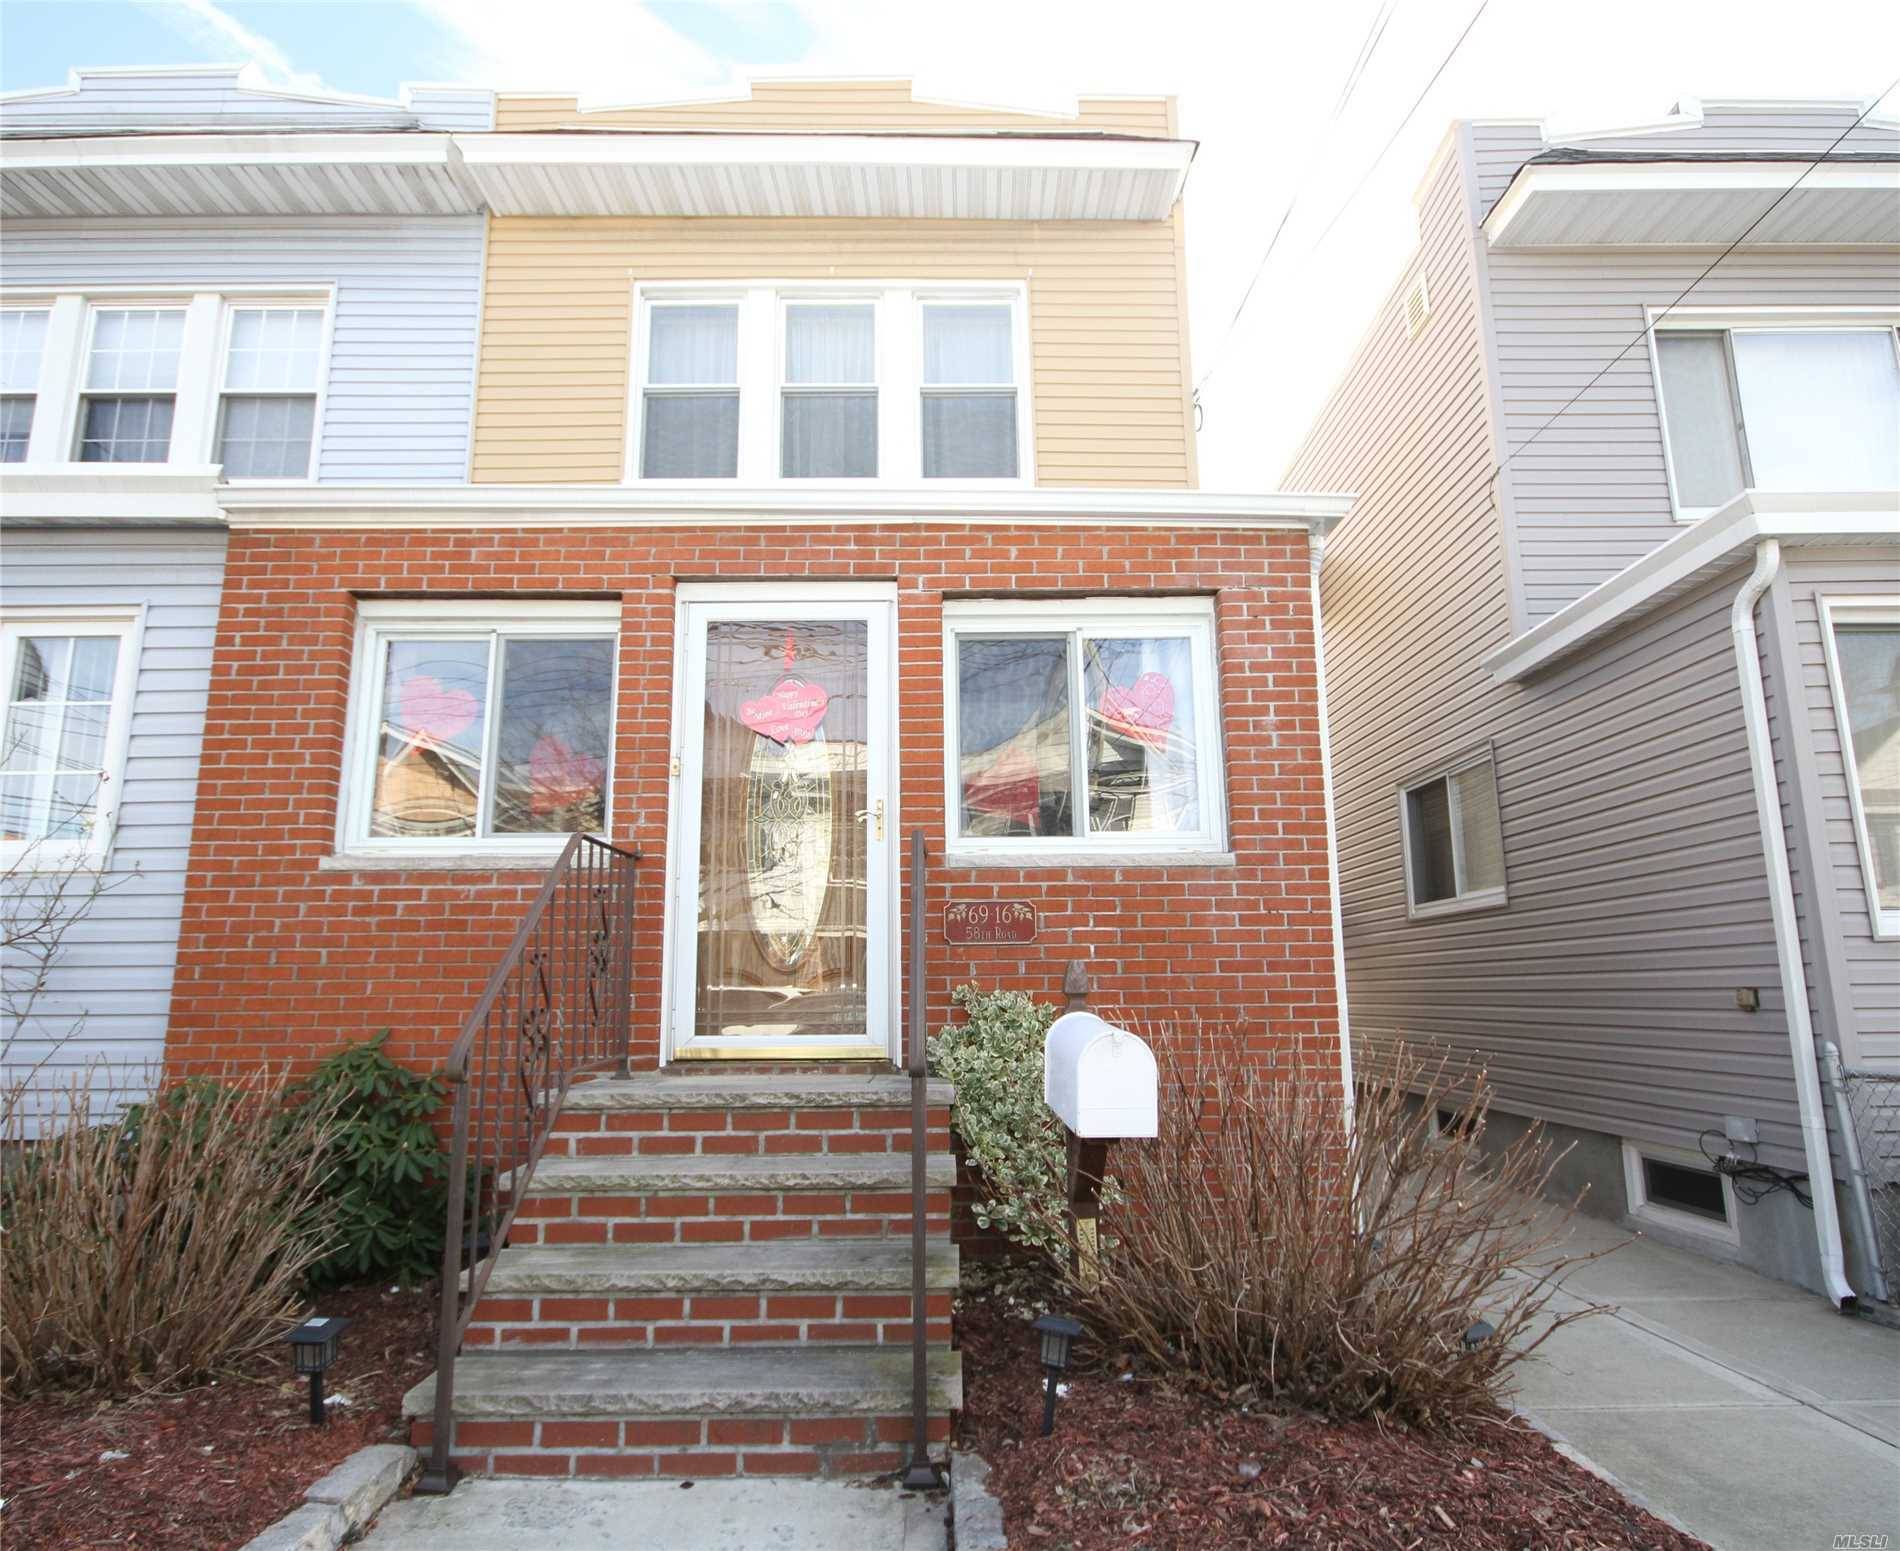 Beautiful Single Family Home In A Great Maspeth Location; Semi-Detached, Spacious And In Excellent Condition.